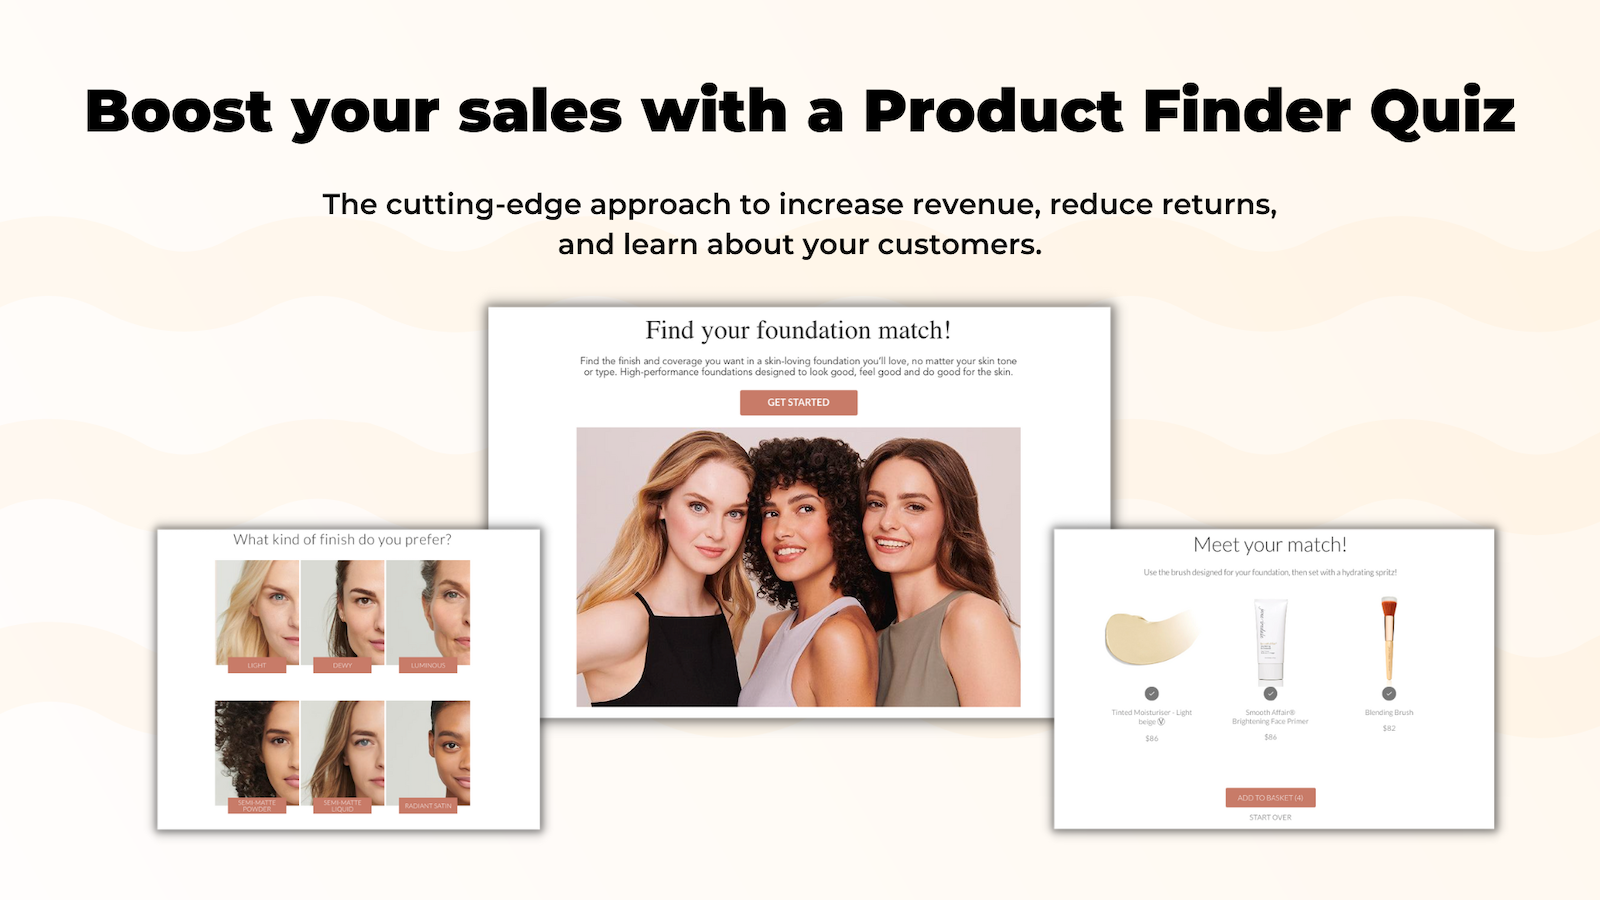 Boost your sales with a Product Finder Quiz